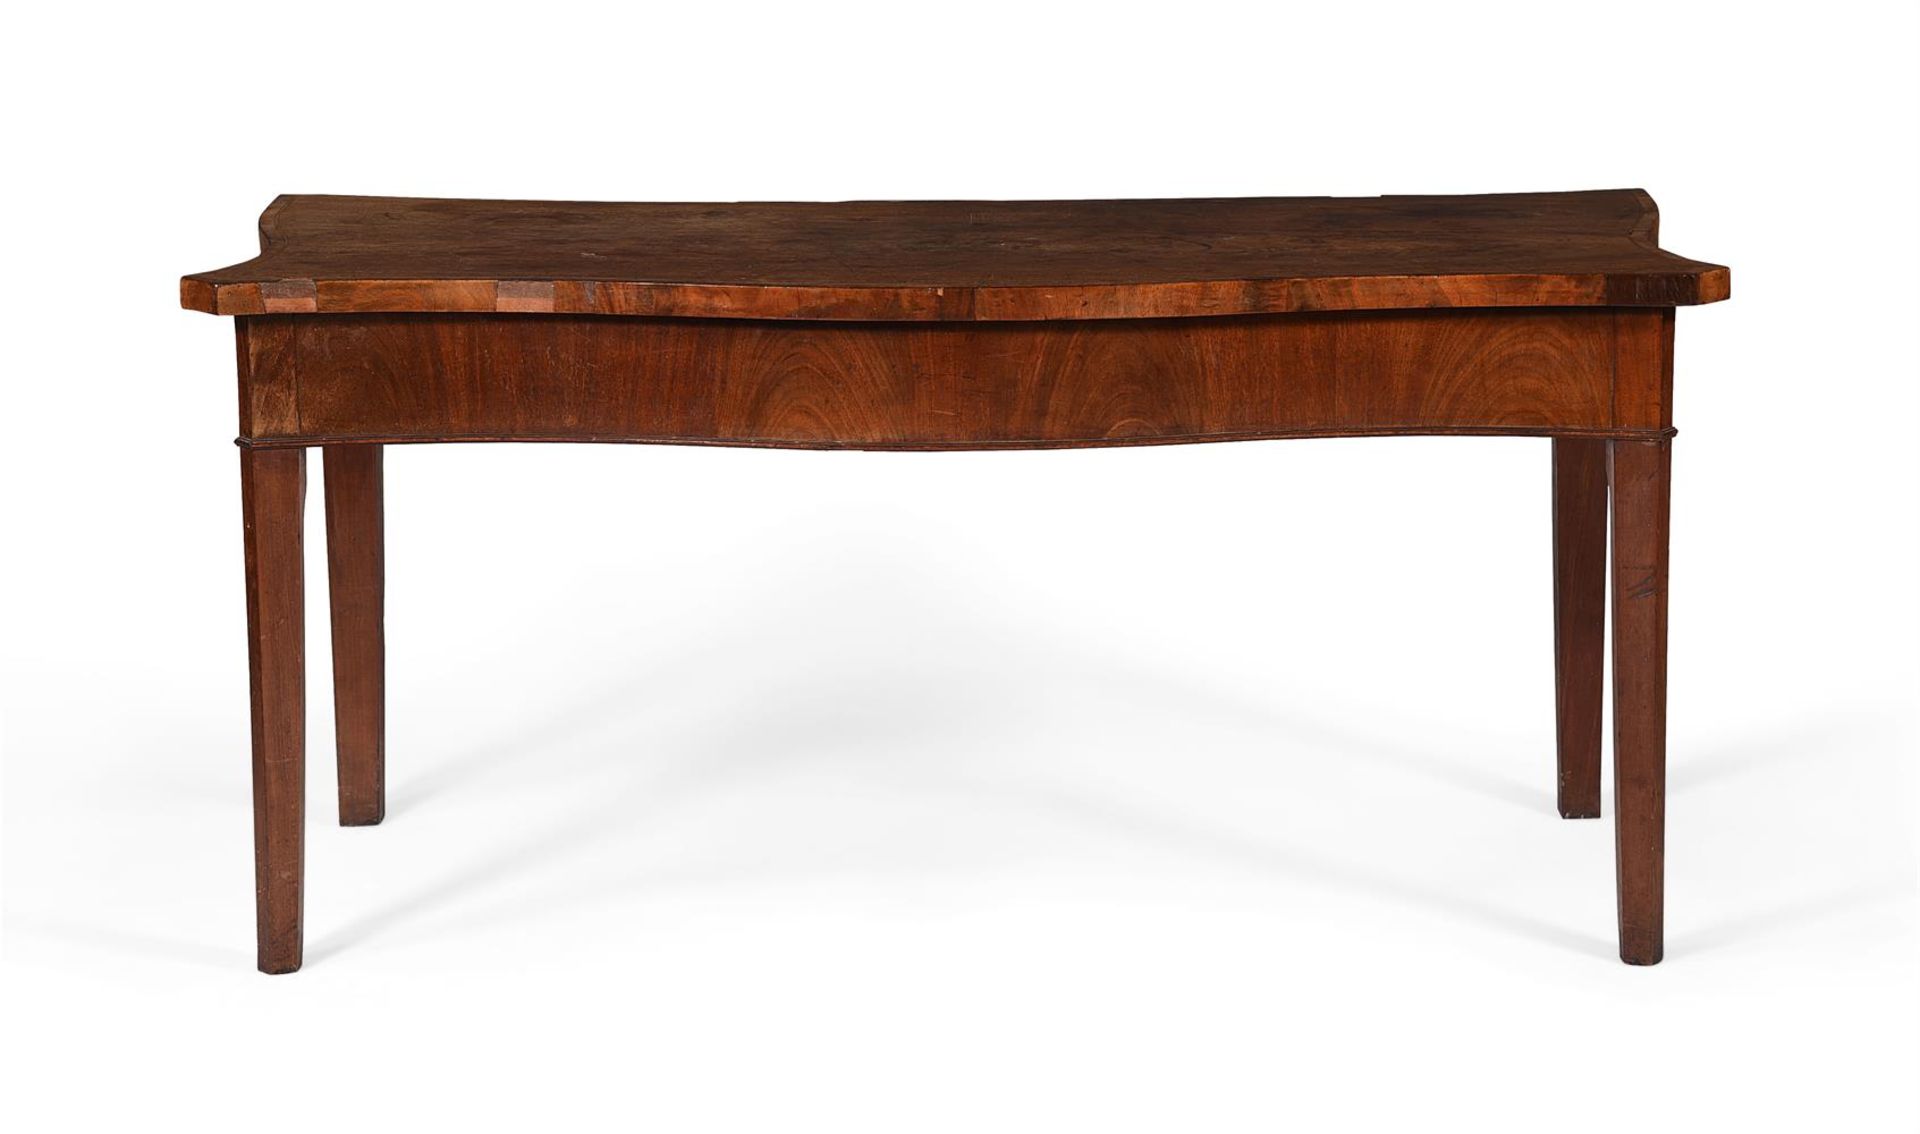 A George III mahogany serpentine serving table